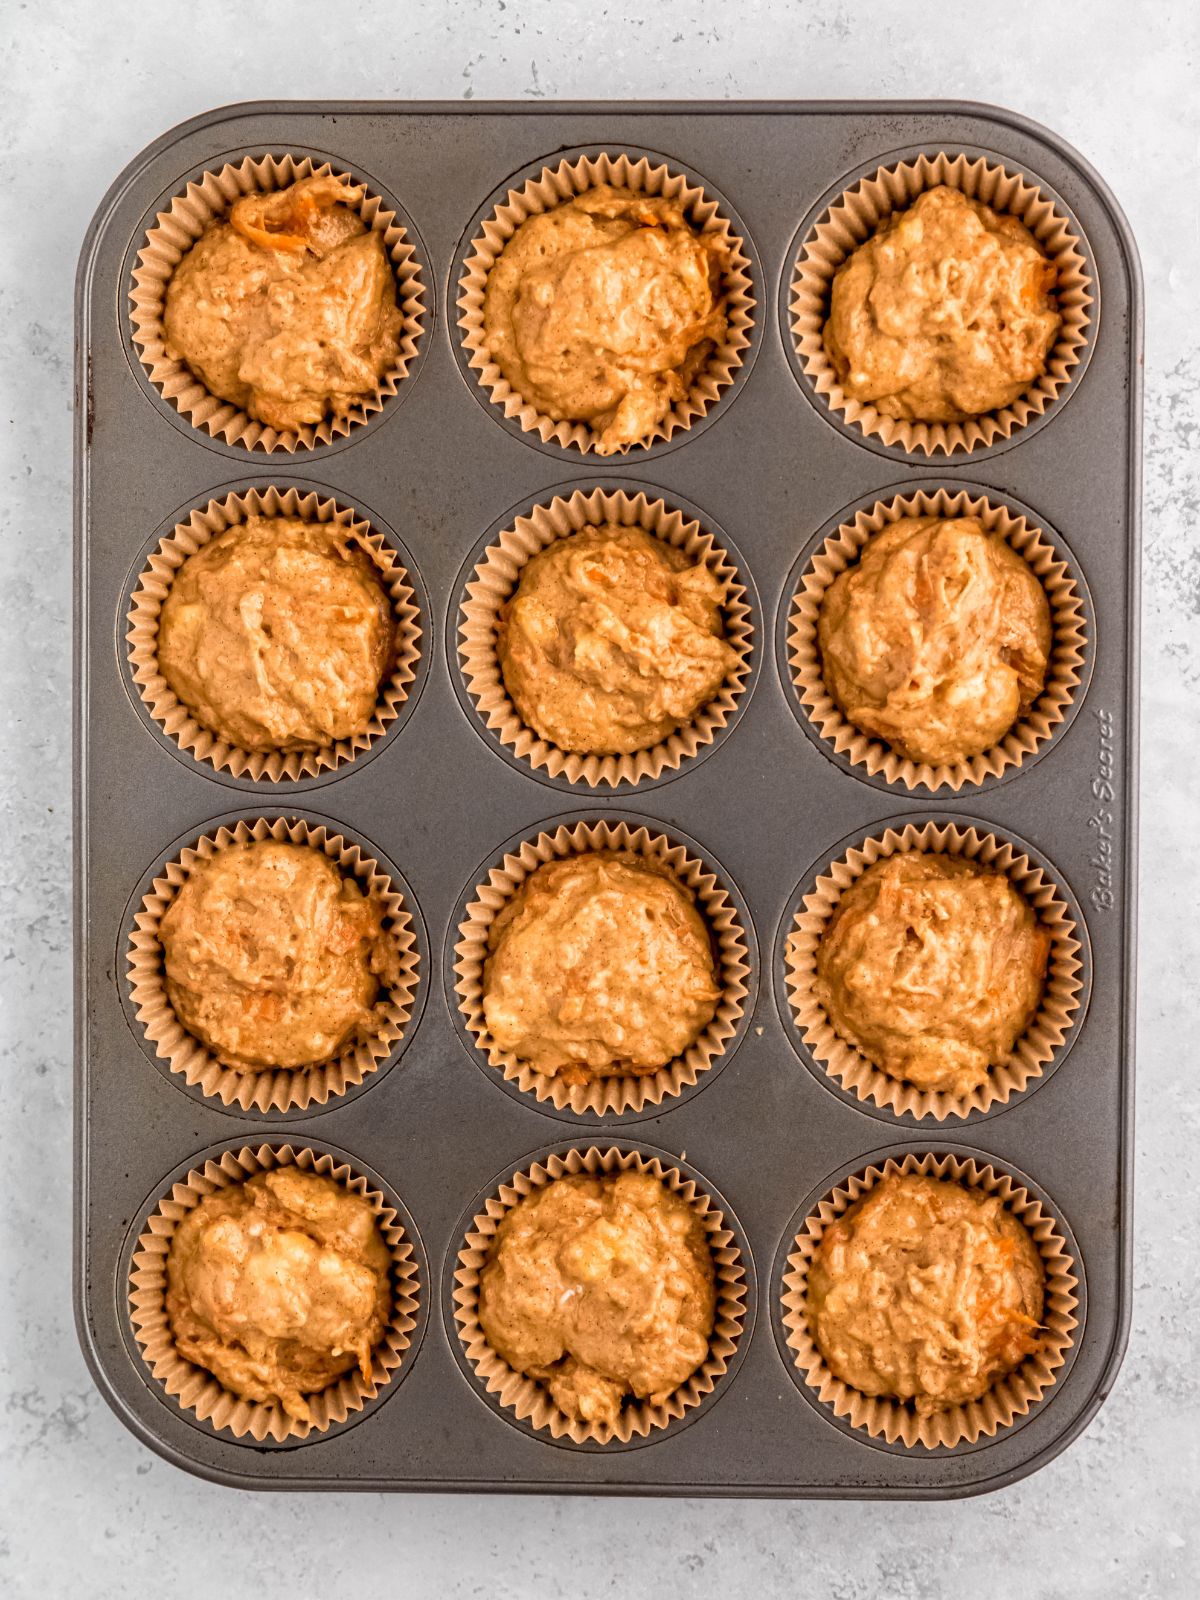 step 4: banana carrot muffin batter divvied up into lined muffin tin for baking.